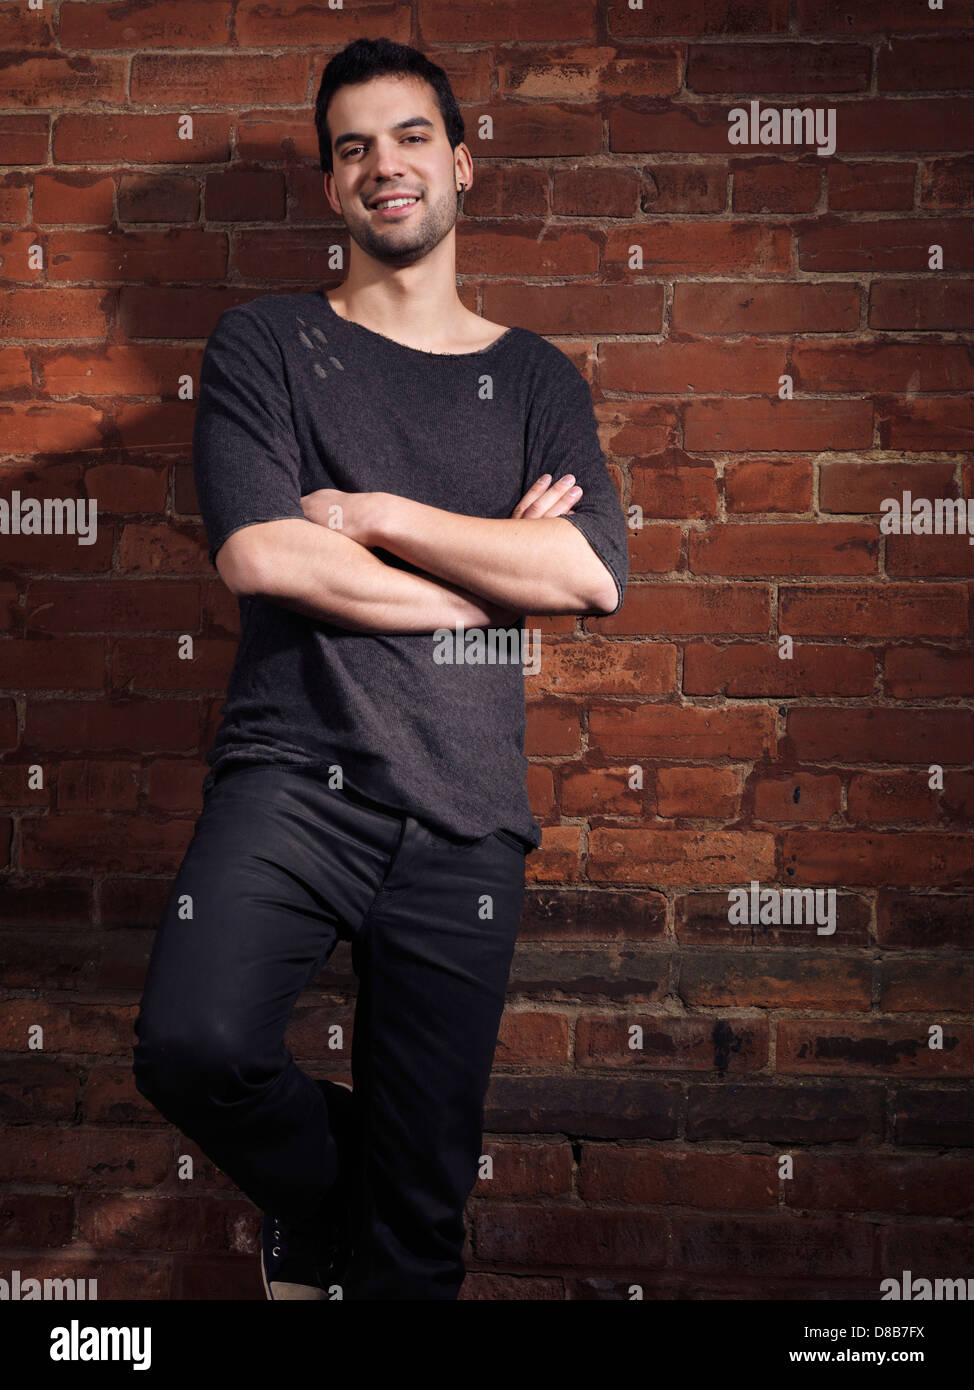 Expressive portrait of a smiling young man wearing black jeans and shirt standing at a brick wall Stock Photo